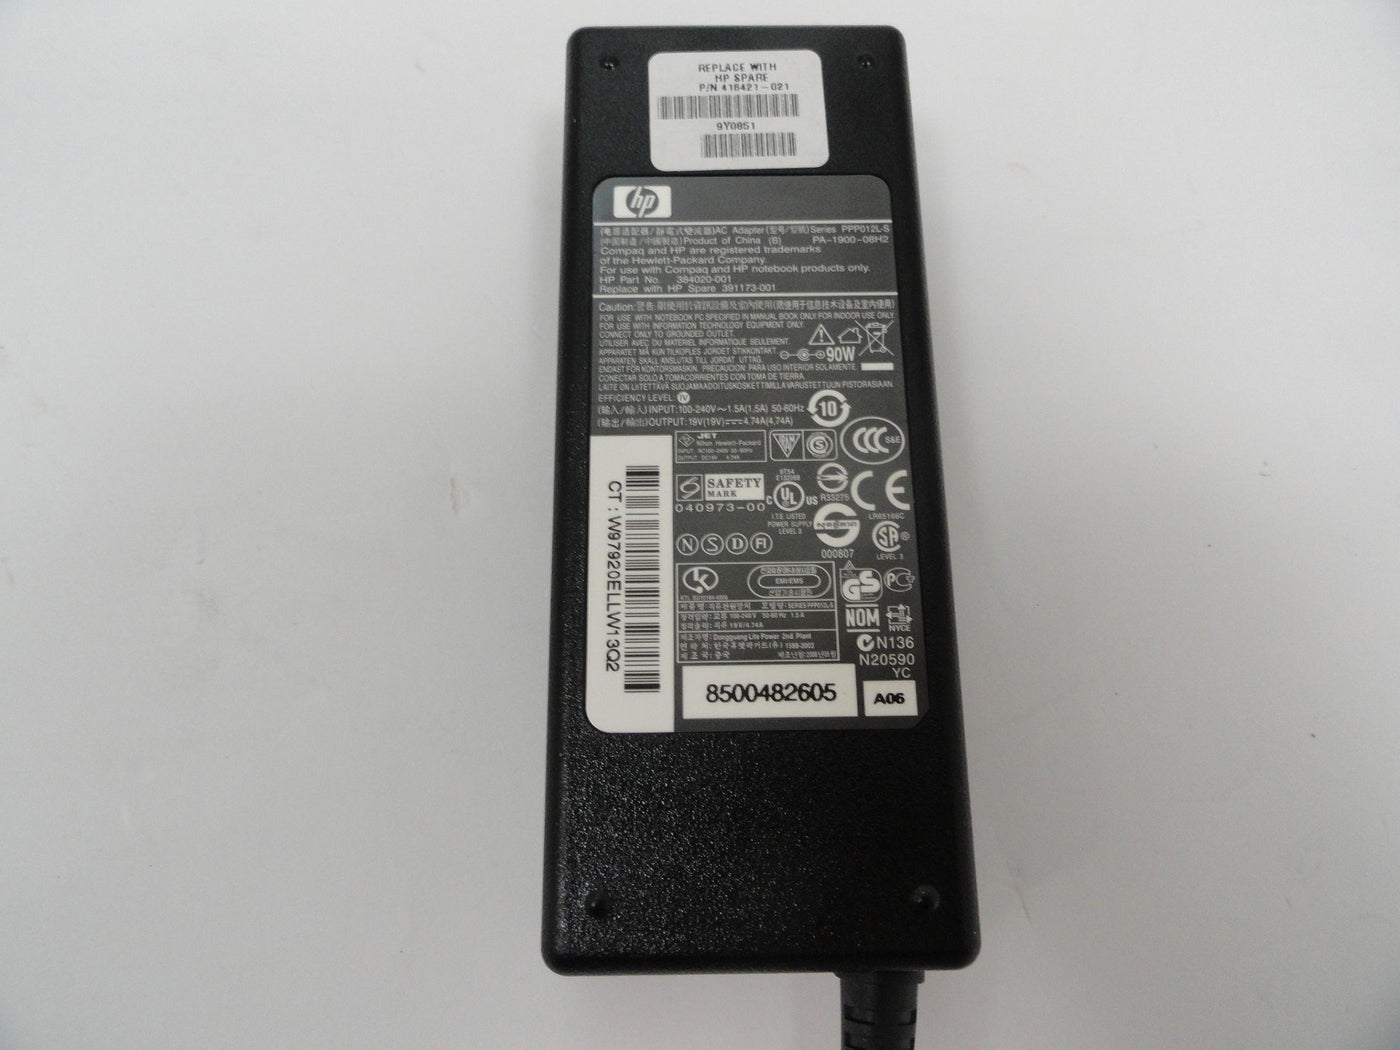 PA-1900-08H2 - HP AC Adapter series PPP012L-S / PA-1900-08H2 Input 100-240v - 1.5A 50/60Hz Output 19v - 4.74A. 0.8mm Barrel and Pin Connector - Refurbished